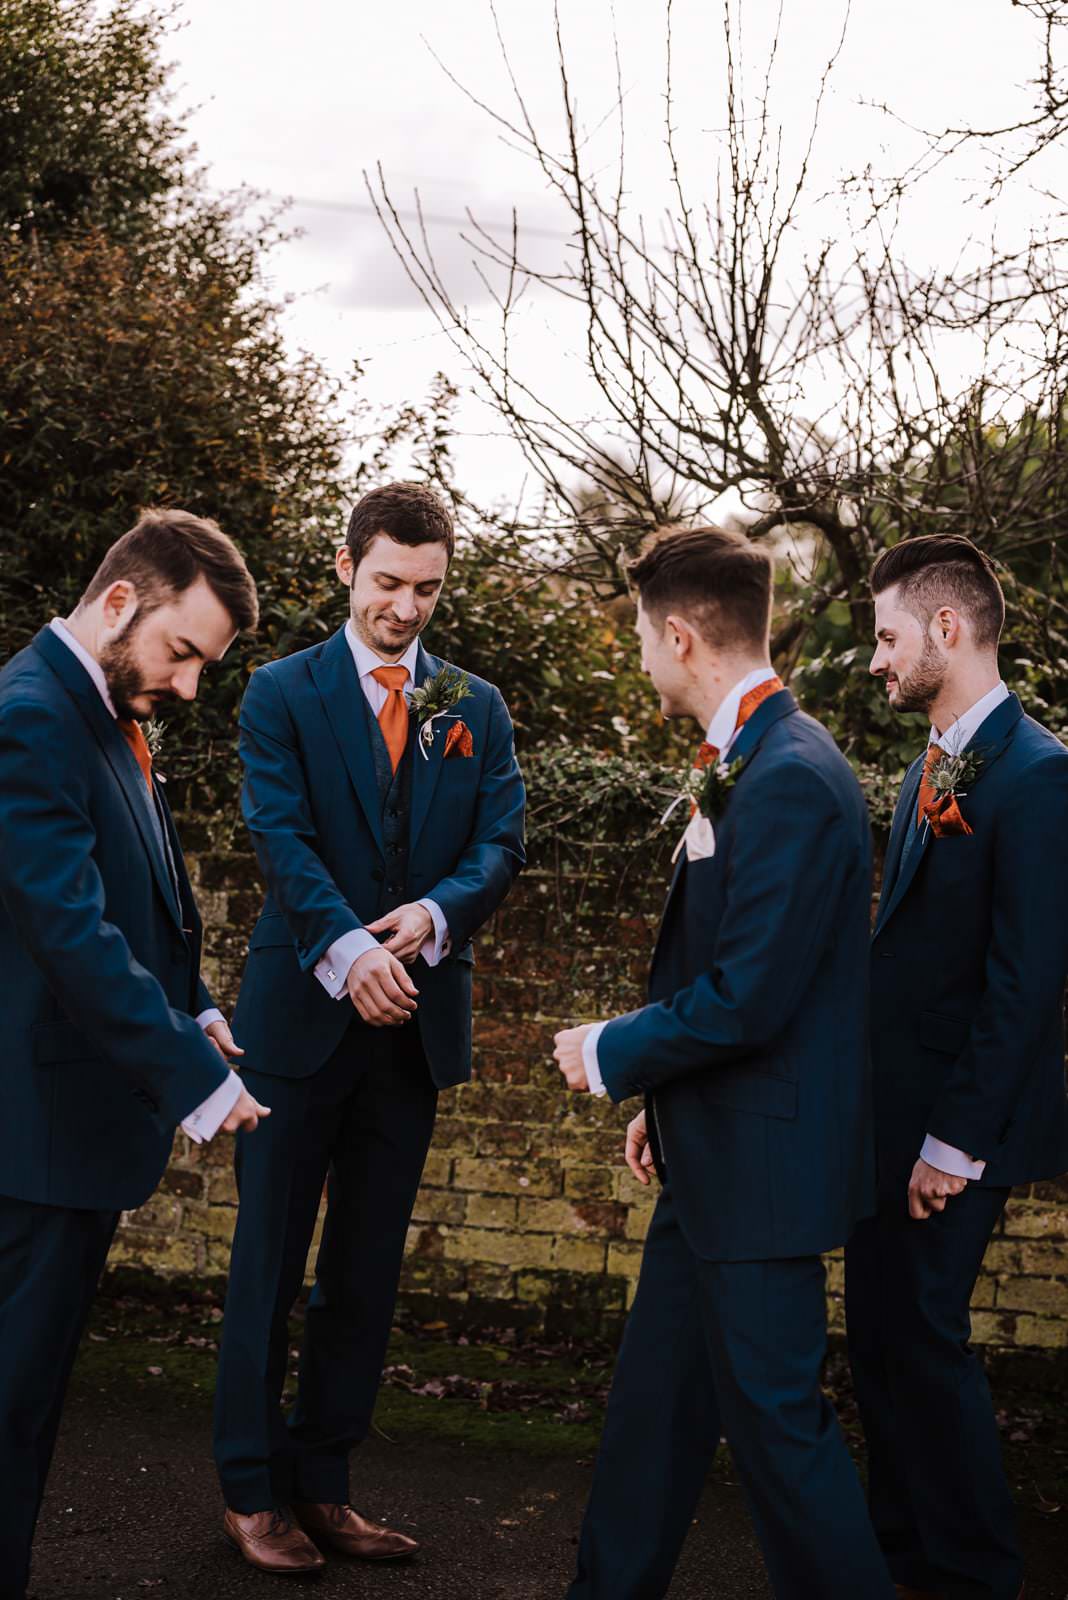 Wedding ceremony groom and the groomsmen in blue suits Roshni photography The Milling Barn, Bluntswood Hall, Throcking wedding photographer